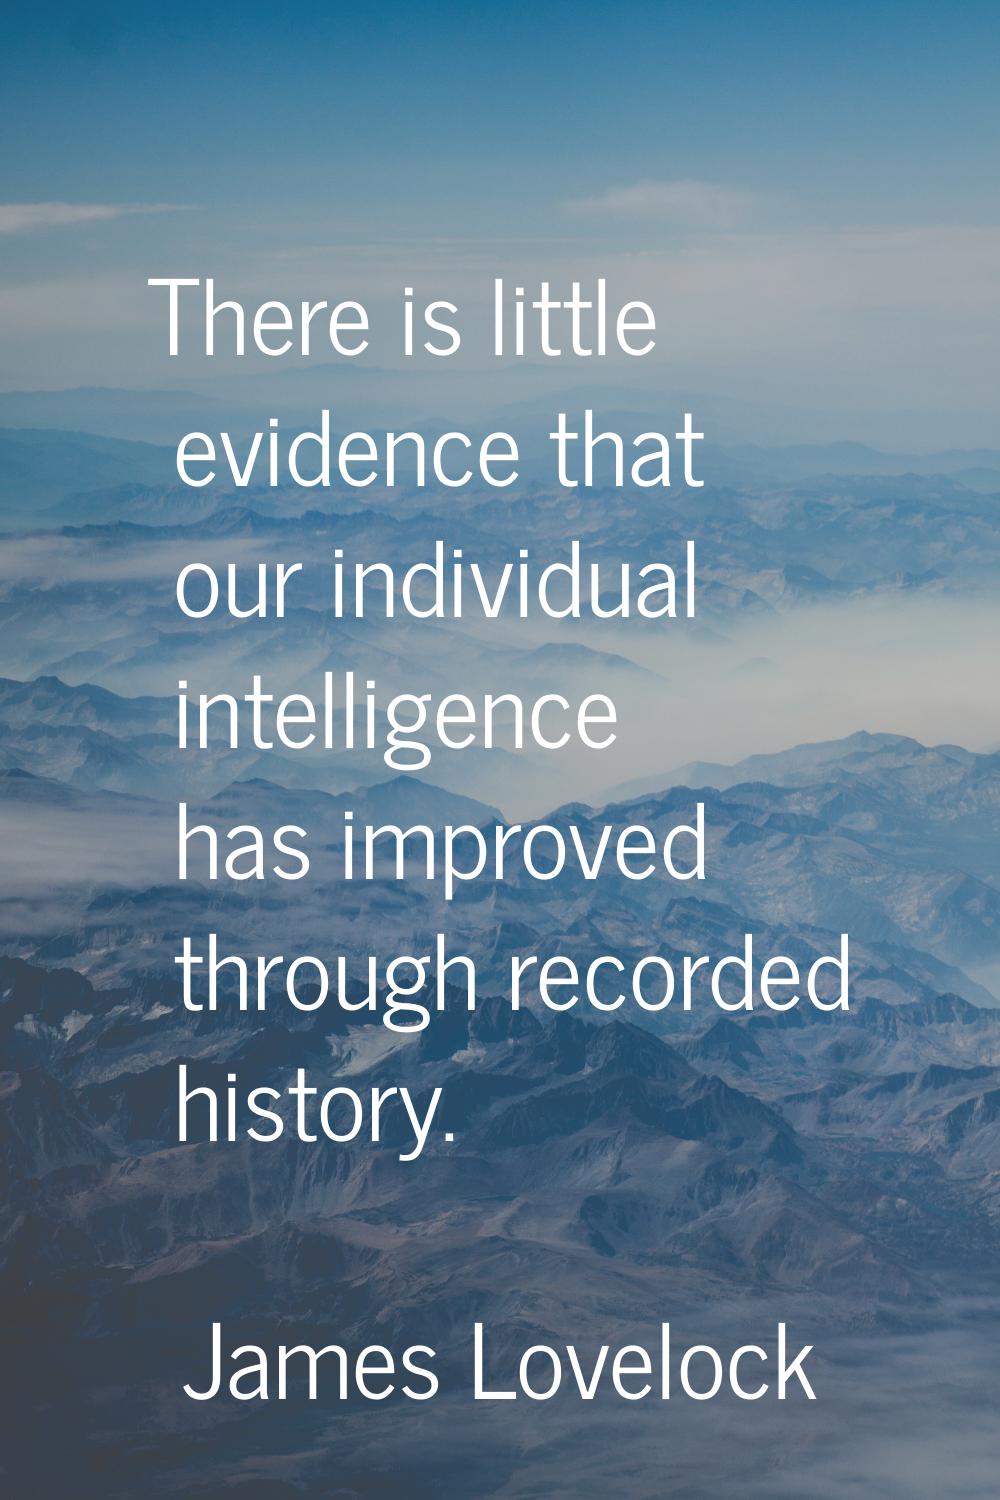 There is little evidence that our individual intelligence has improved through recorded history.